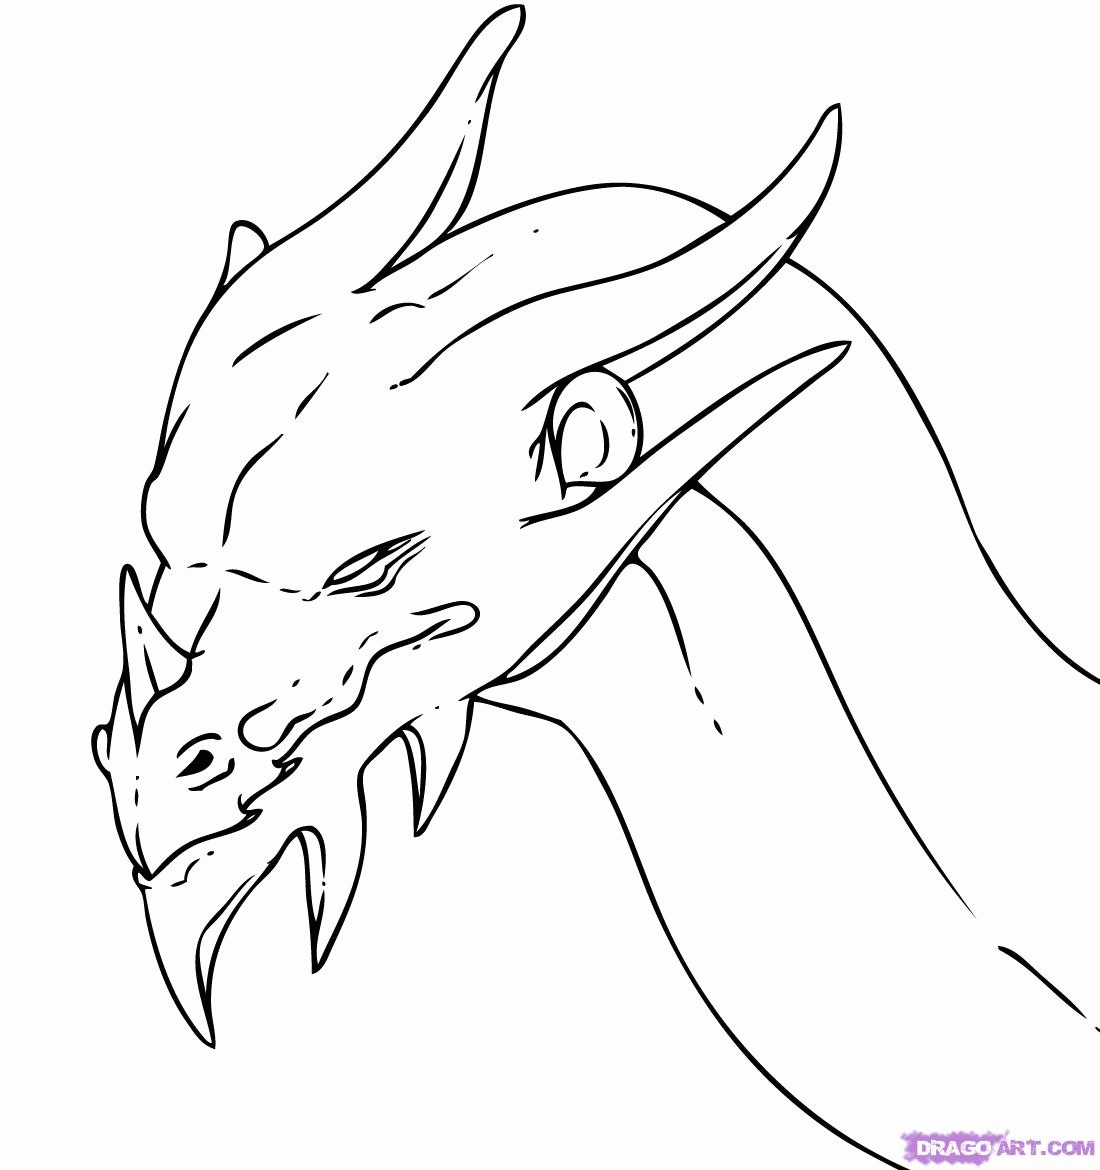 Dragon Face Coloring Page